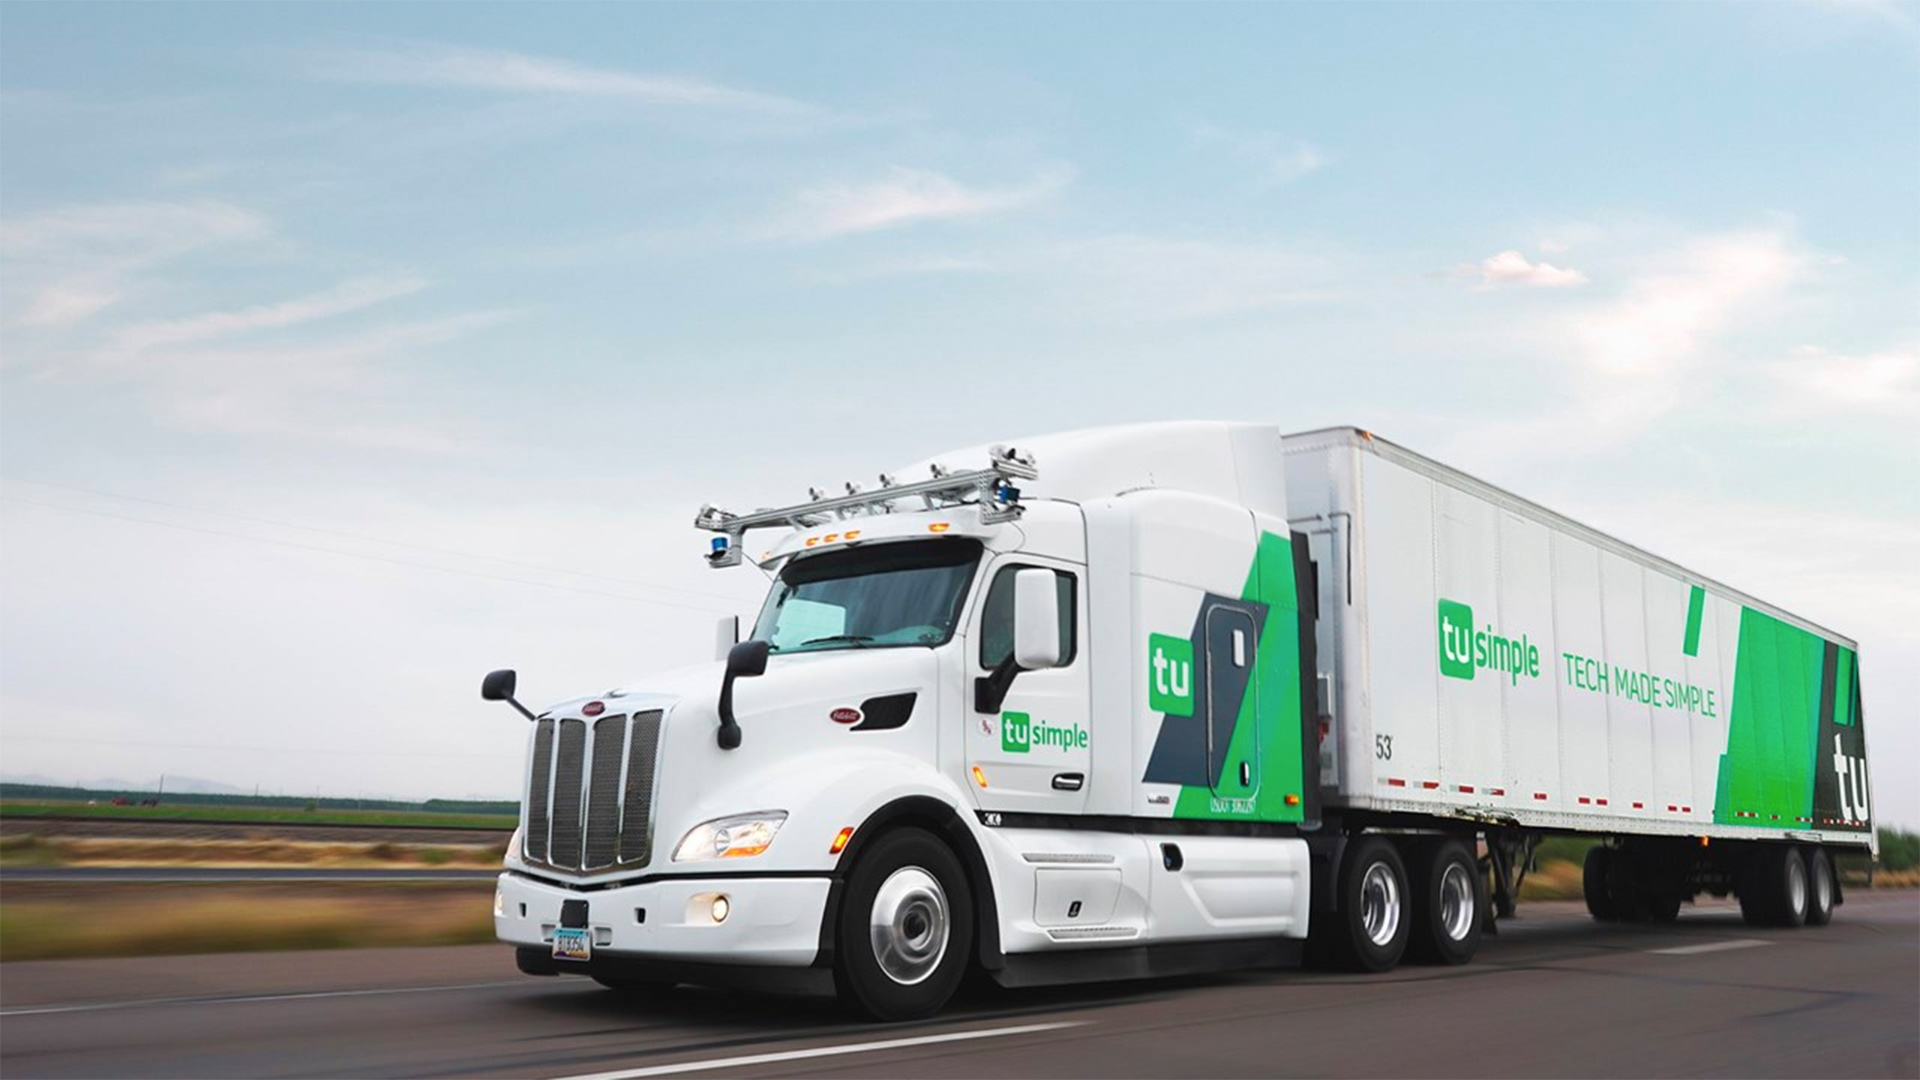 Autonomous truck technology road-tested in Tucson